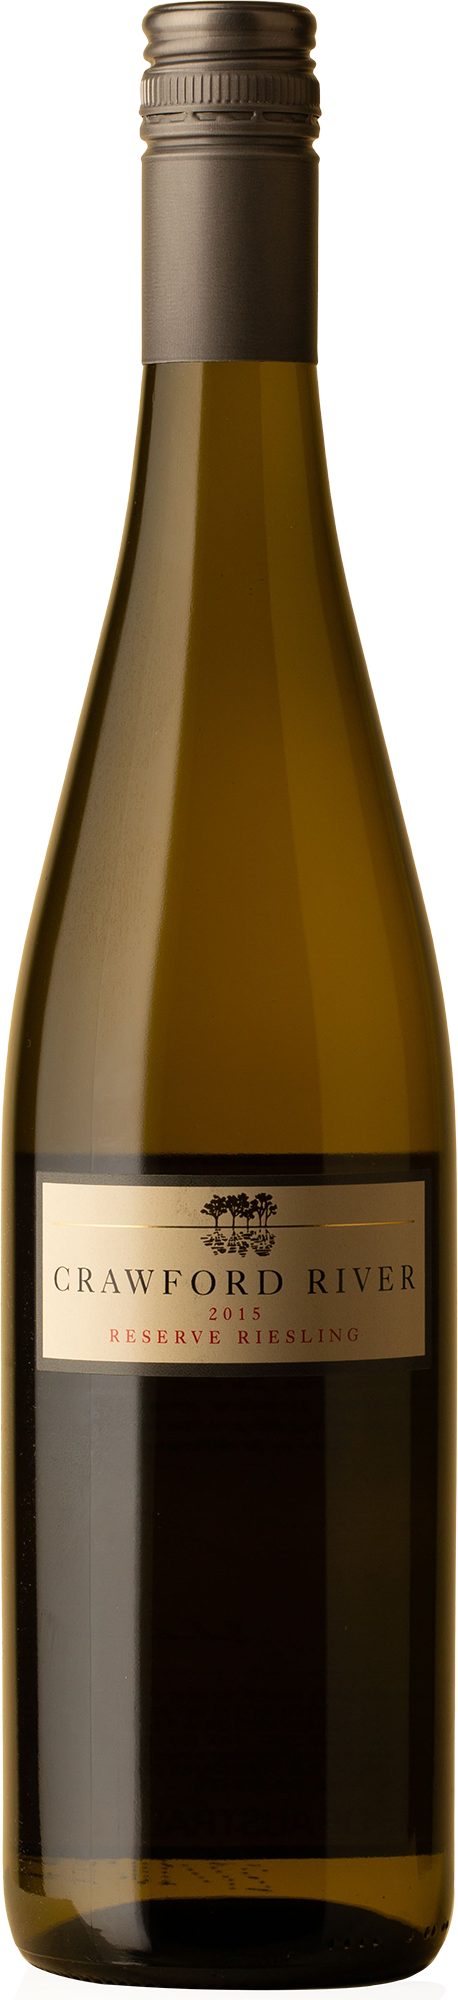 Crawford River - Reserve Riesling 2015 White Wine